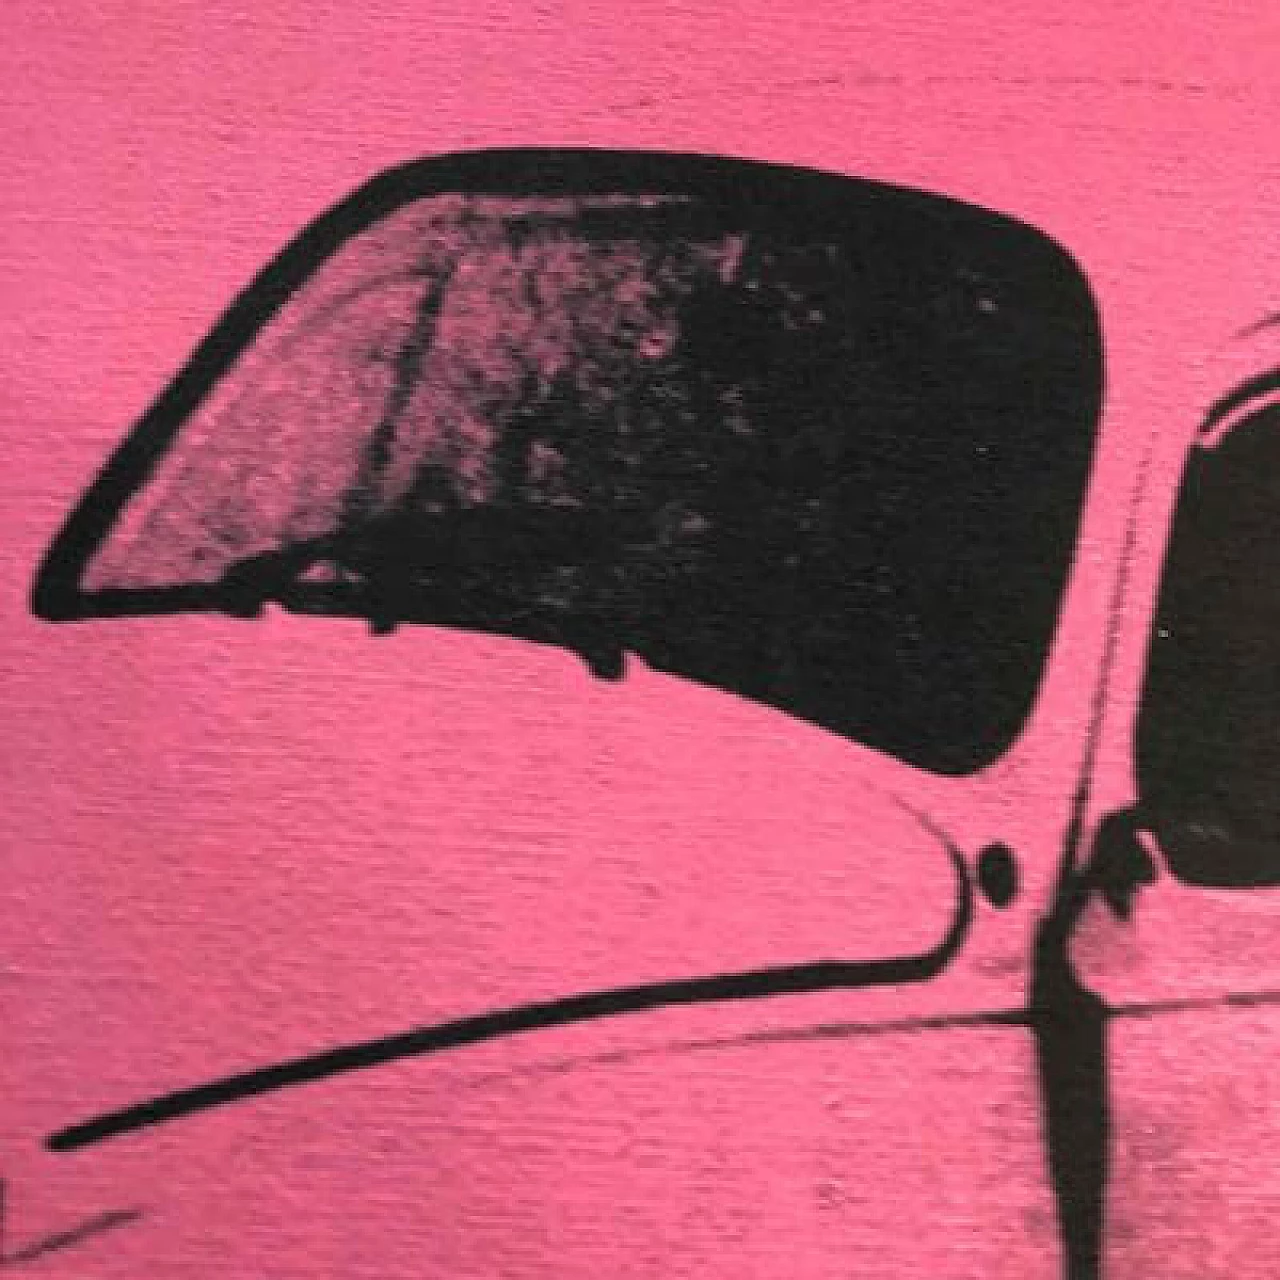 Andy Warhol, Volkswagen, lithograph, 1980s 7